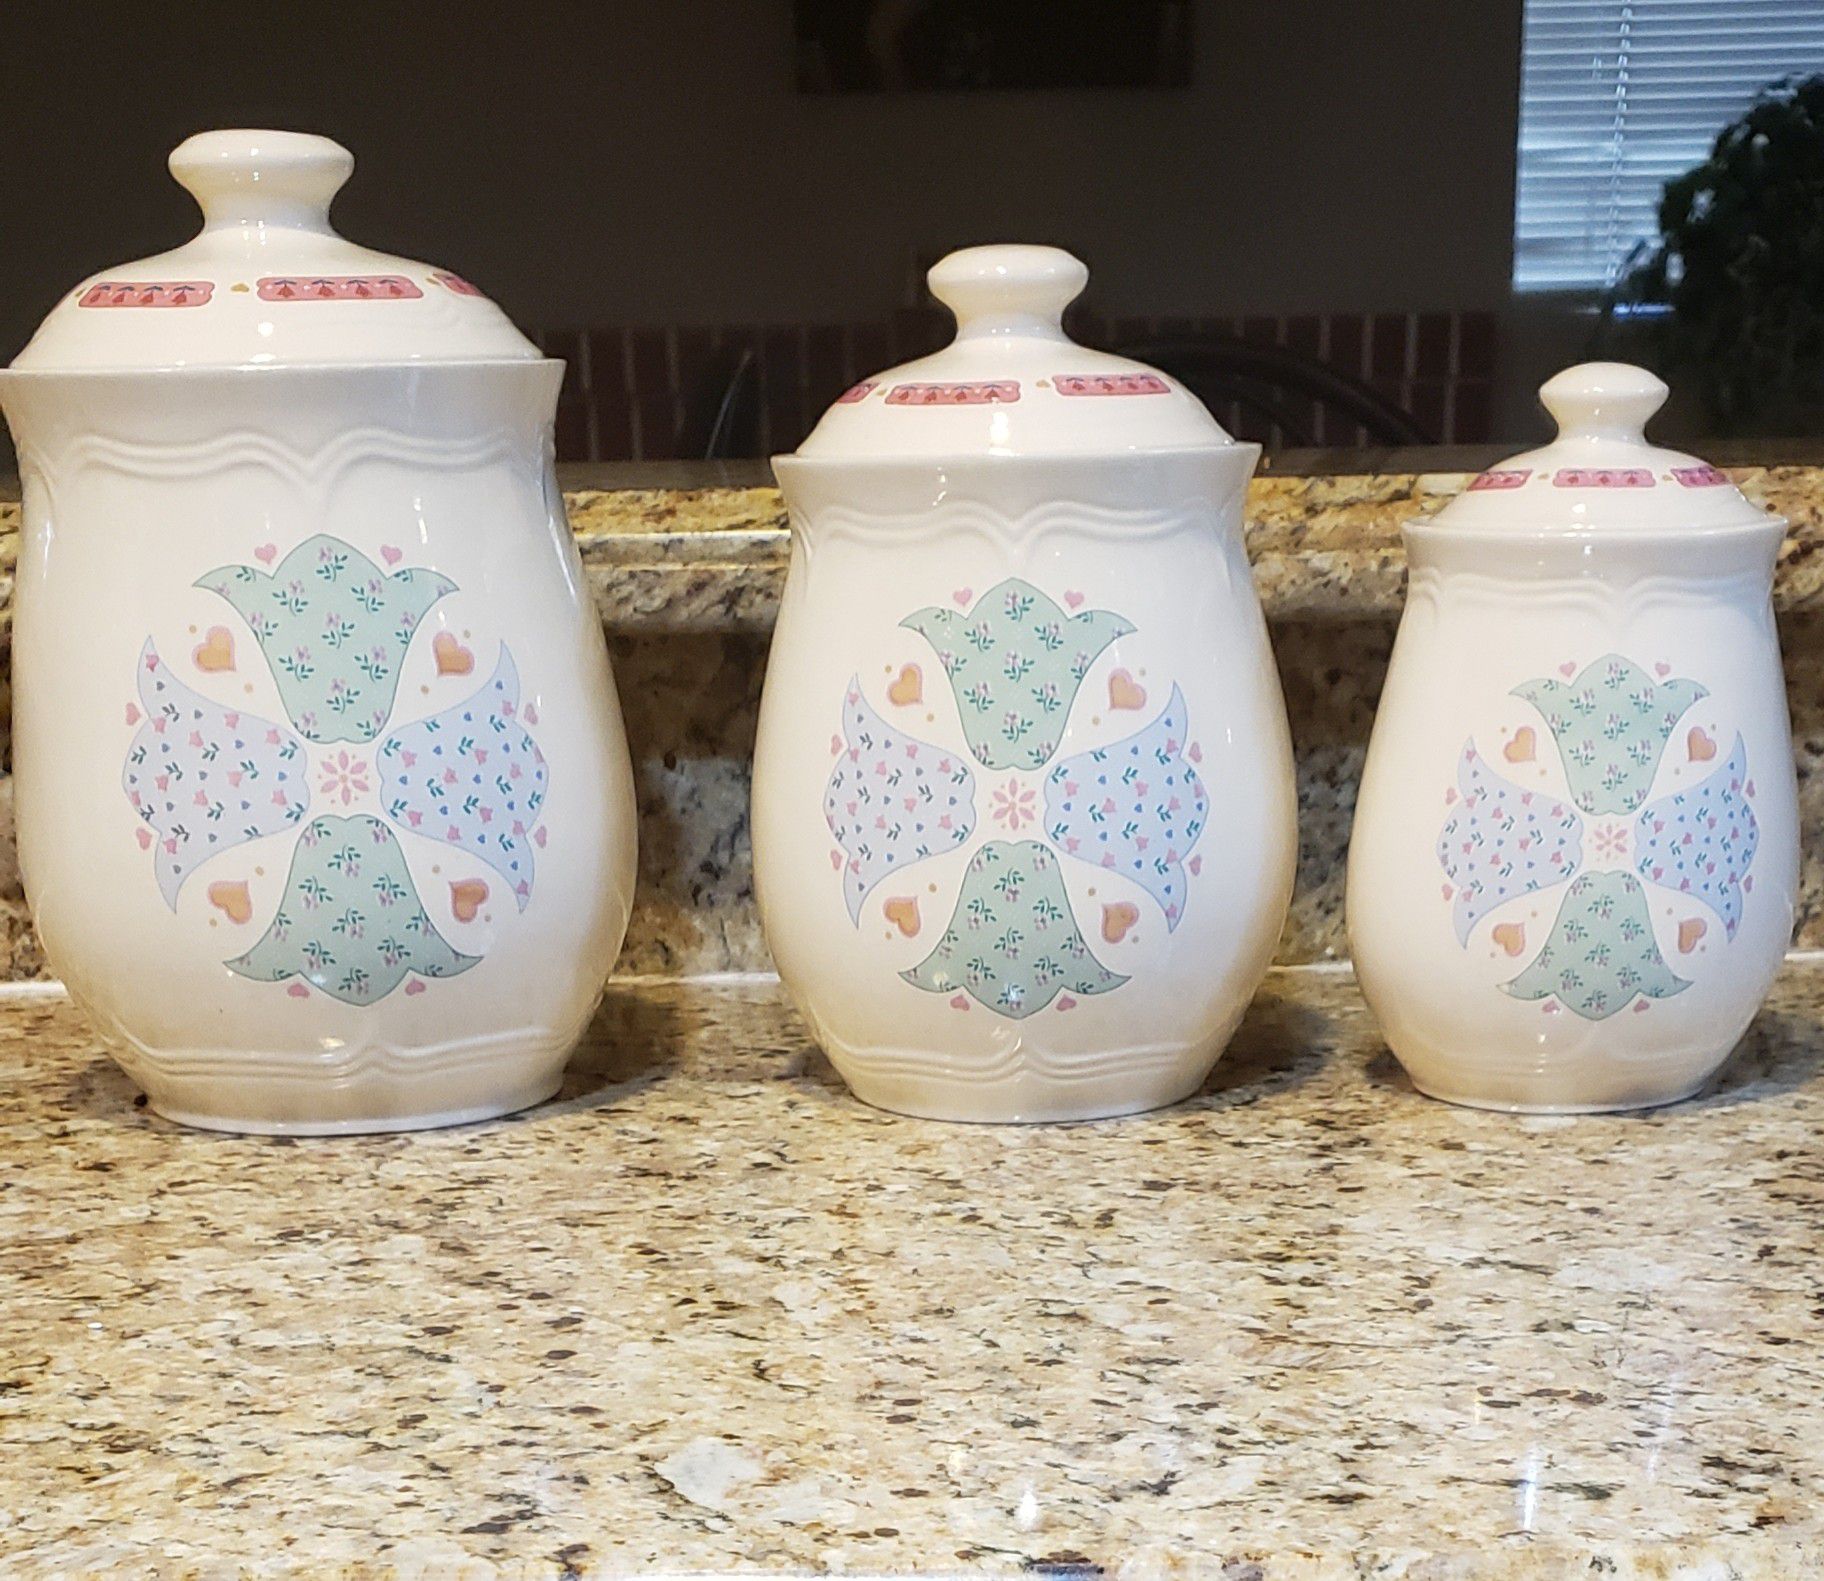 Kitchen canisters from Home Goods. Set of three.